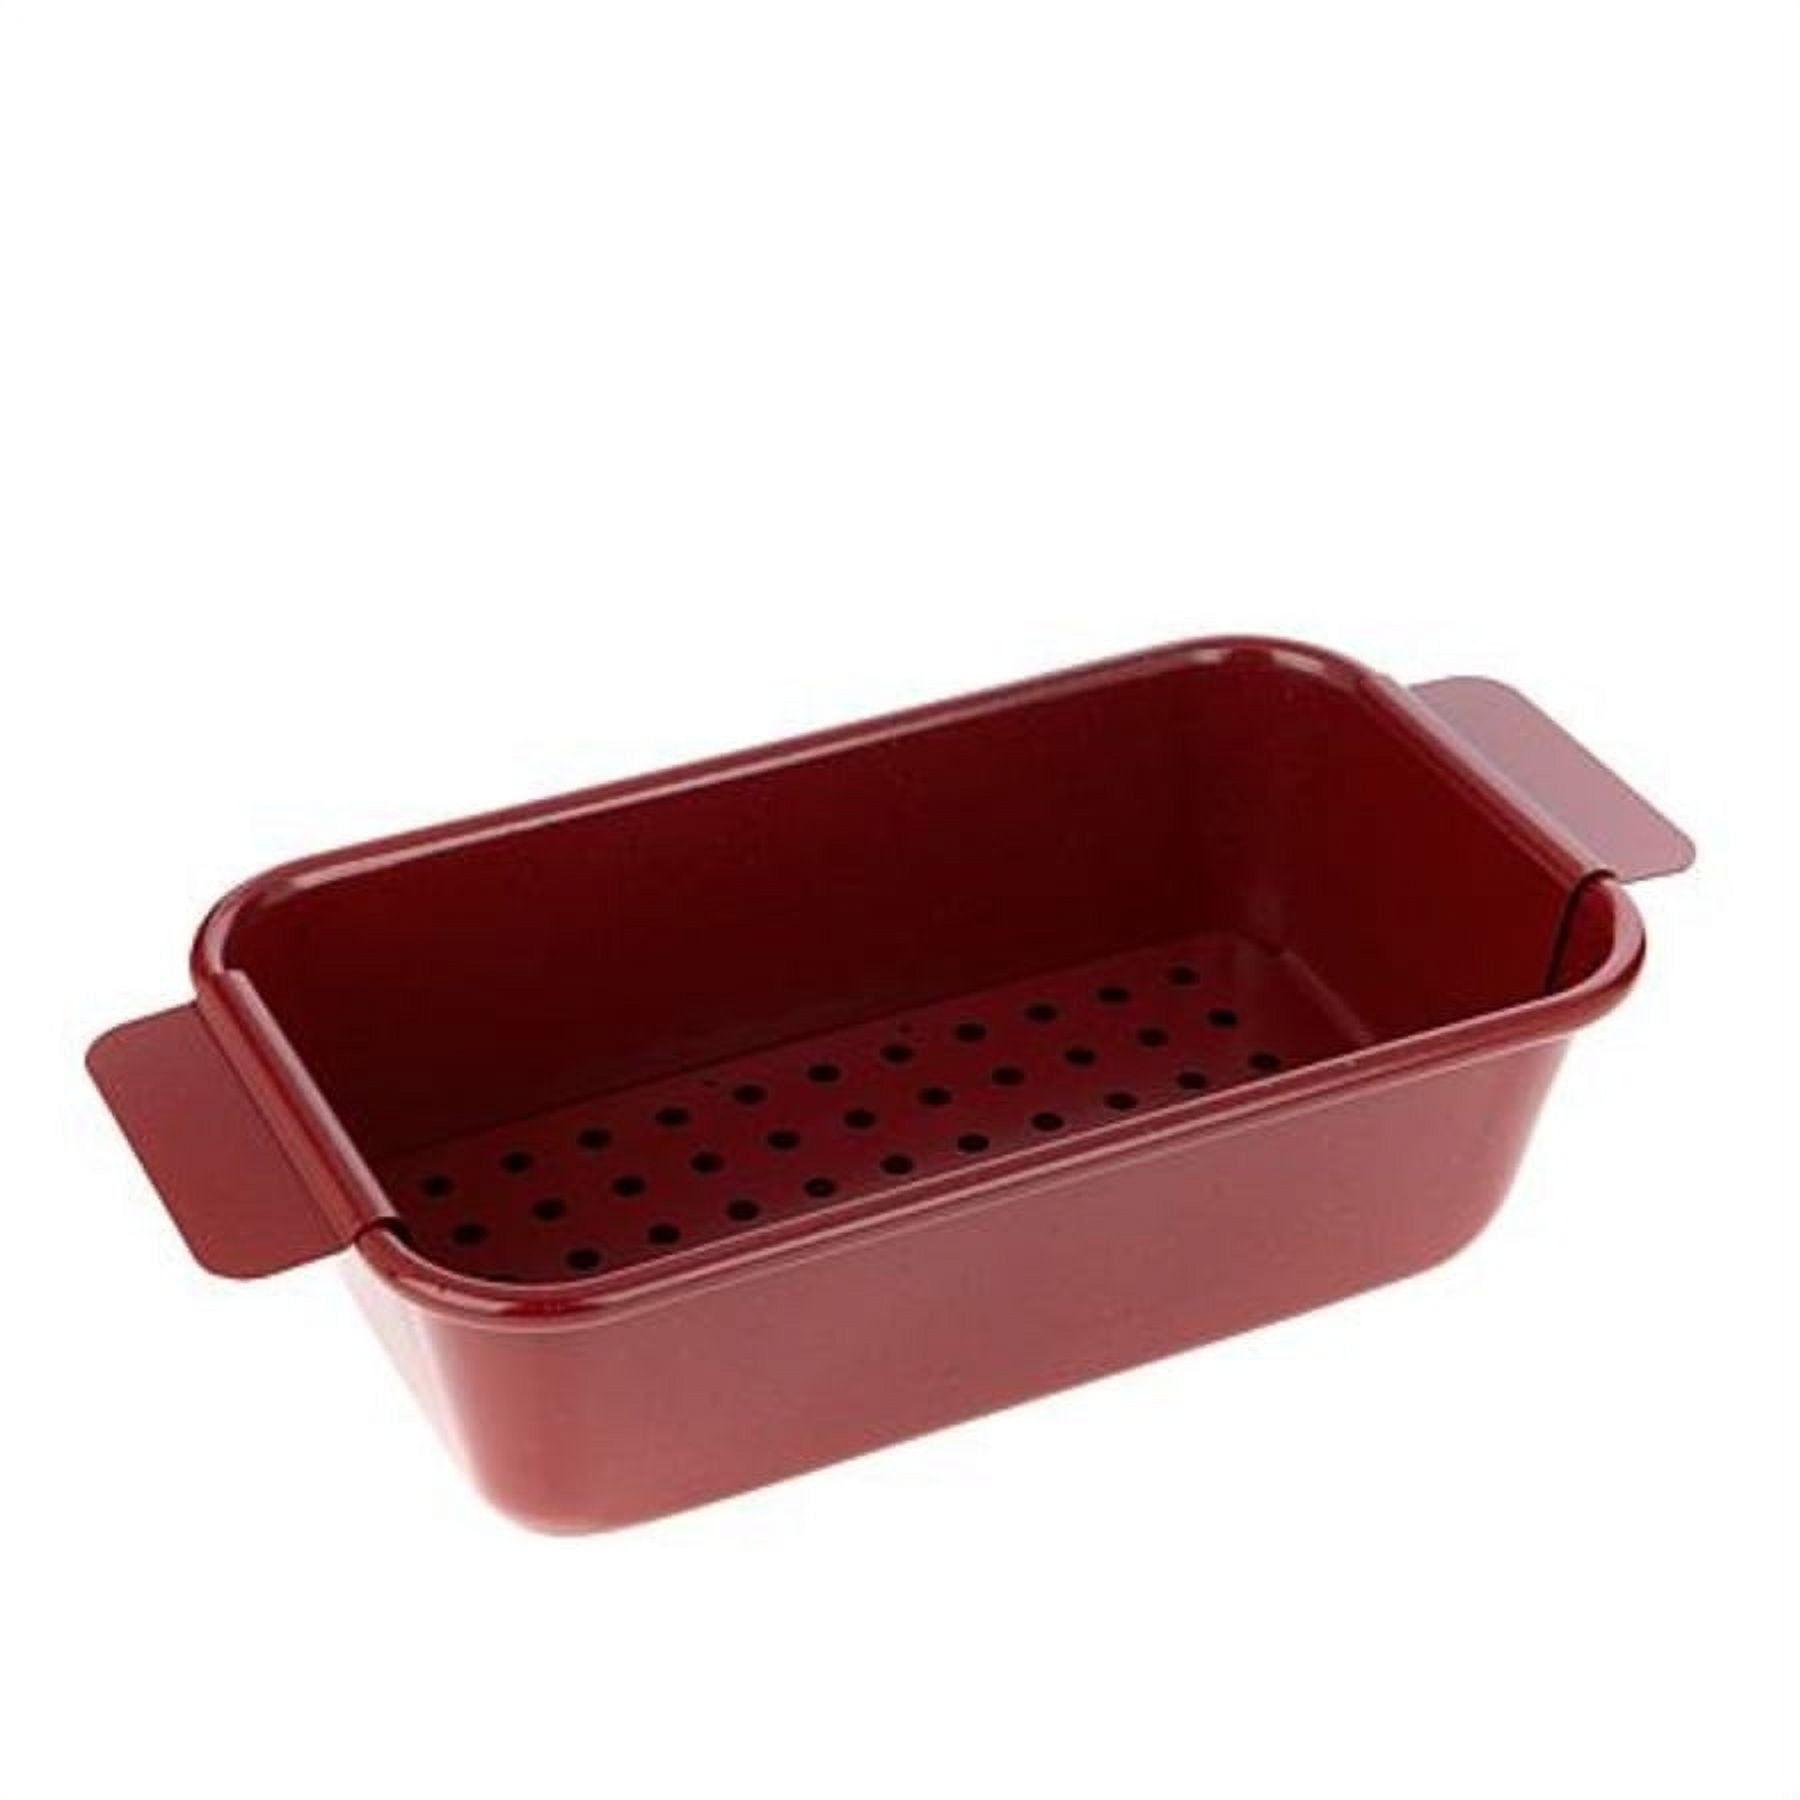 Curtis Stone Dura-Bake Loaf Pan with Insert 573438-611 Red Used 